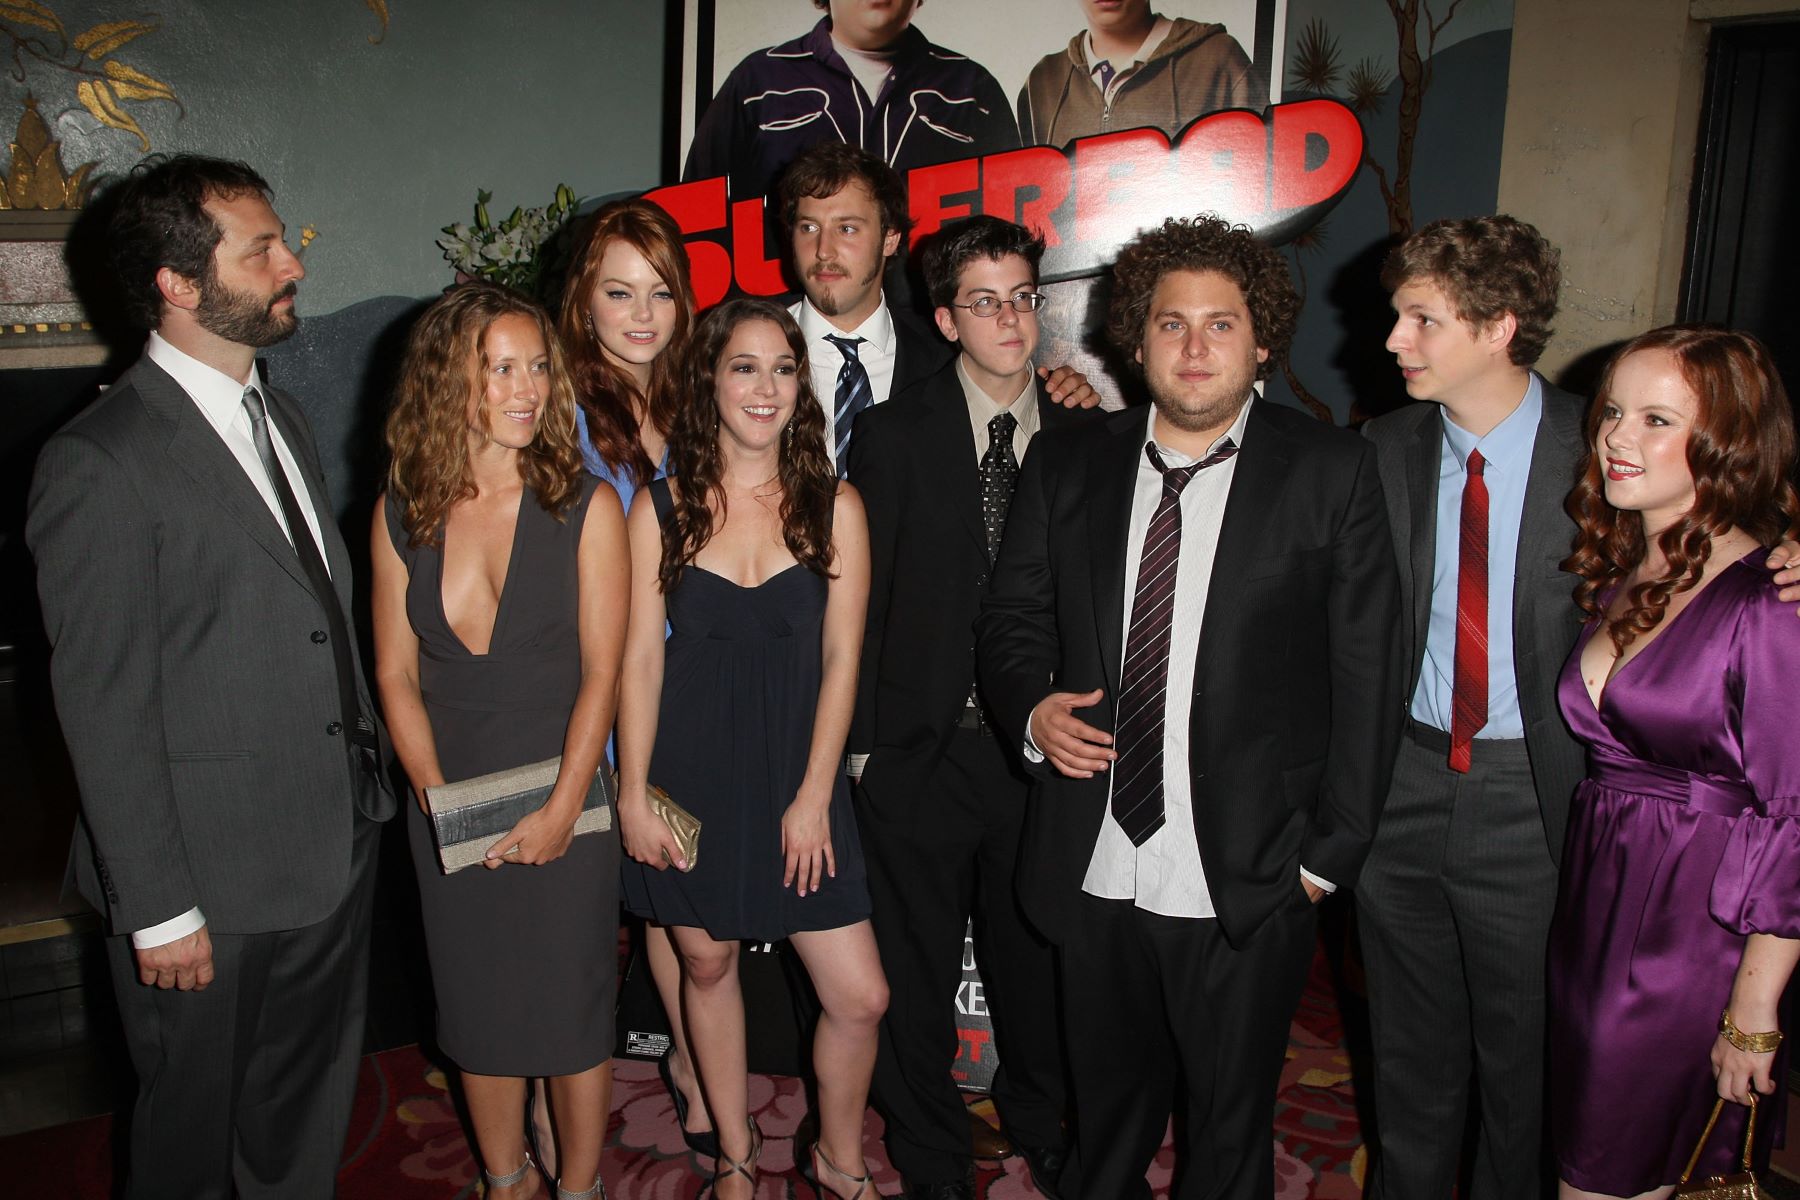 The 'Superbad' cast and crew at the film's premiere at Grauman's Chinese Theatre